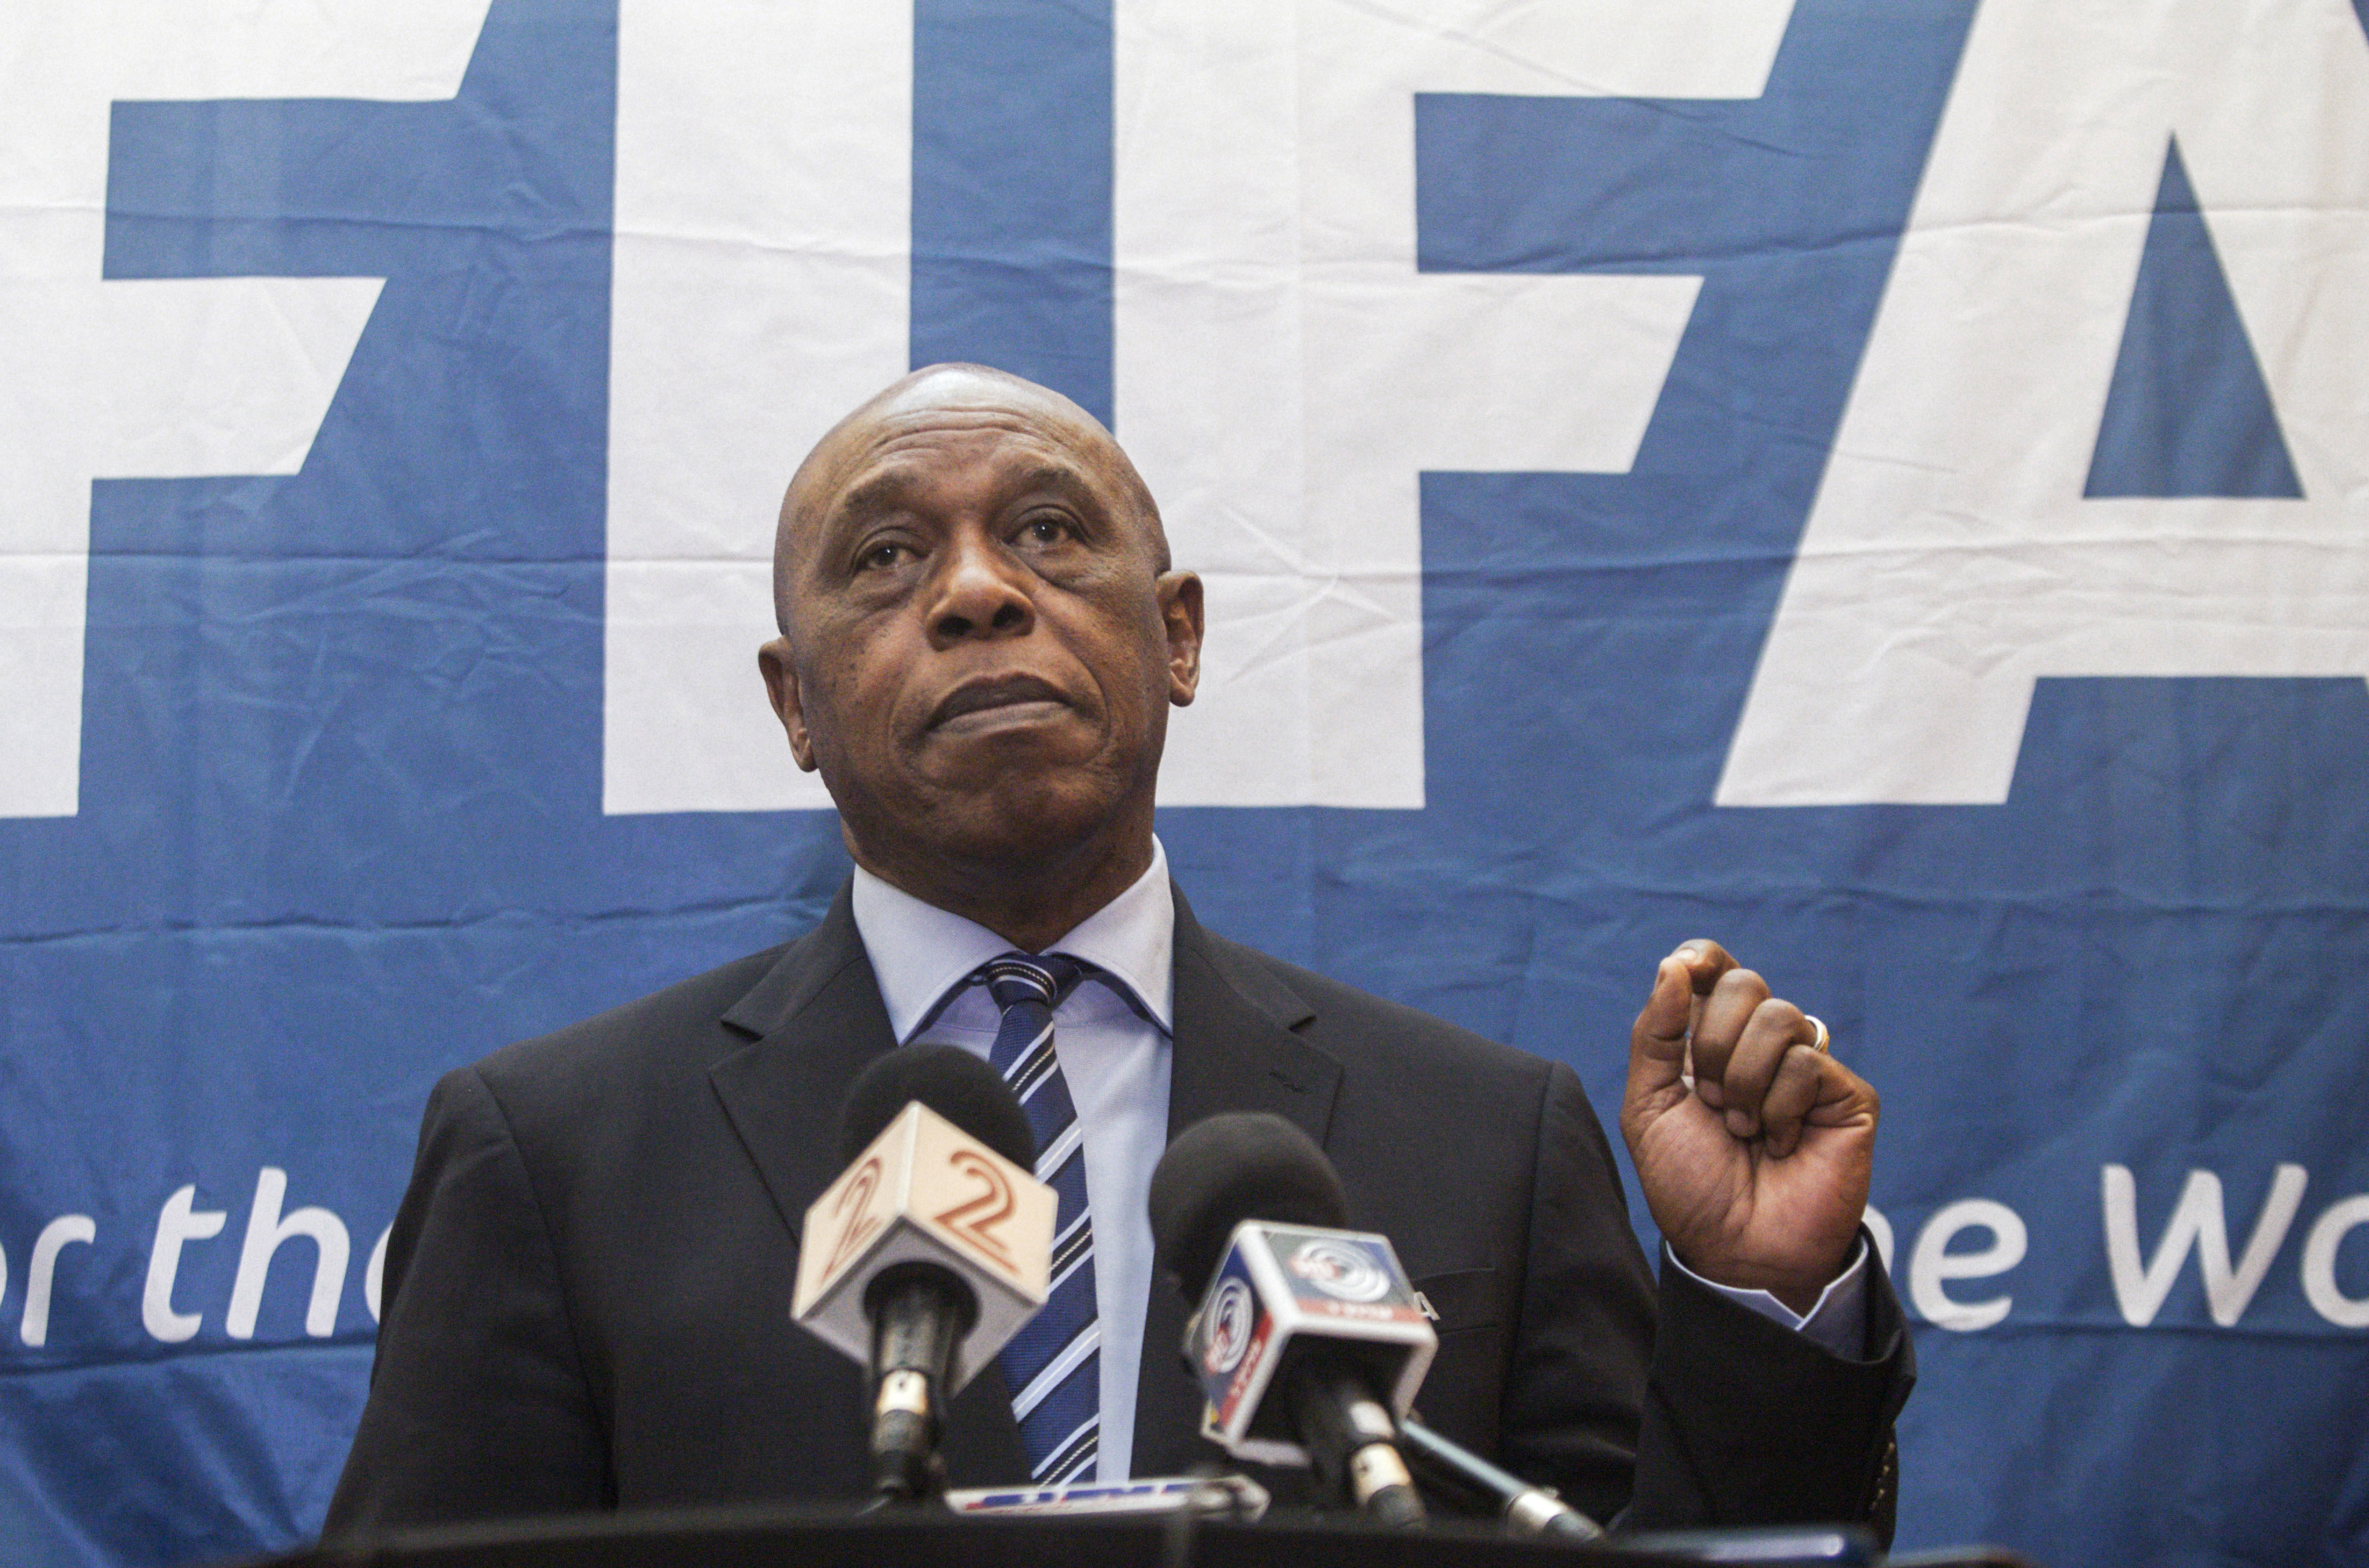 Tokyo Sexwale is bidding to become the first African head of Fifa at this month’s election. Photo: AP